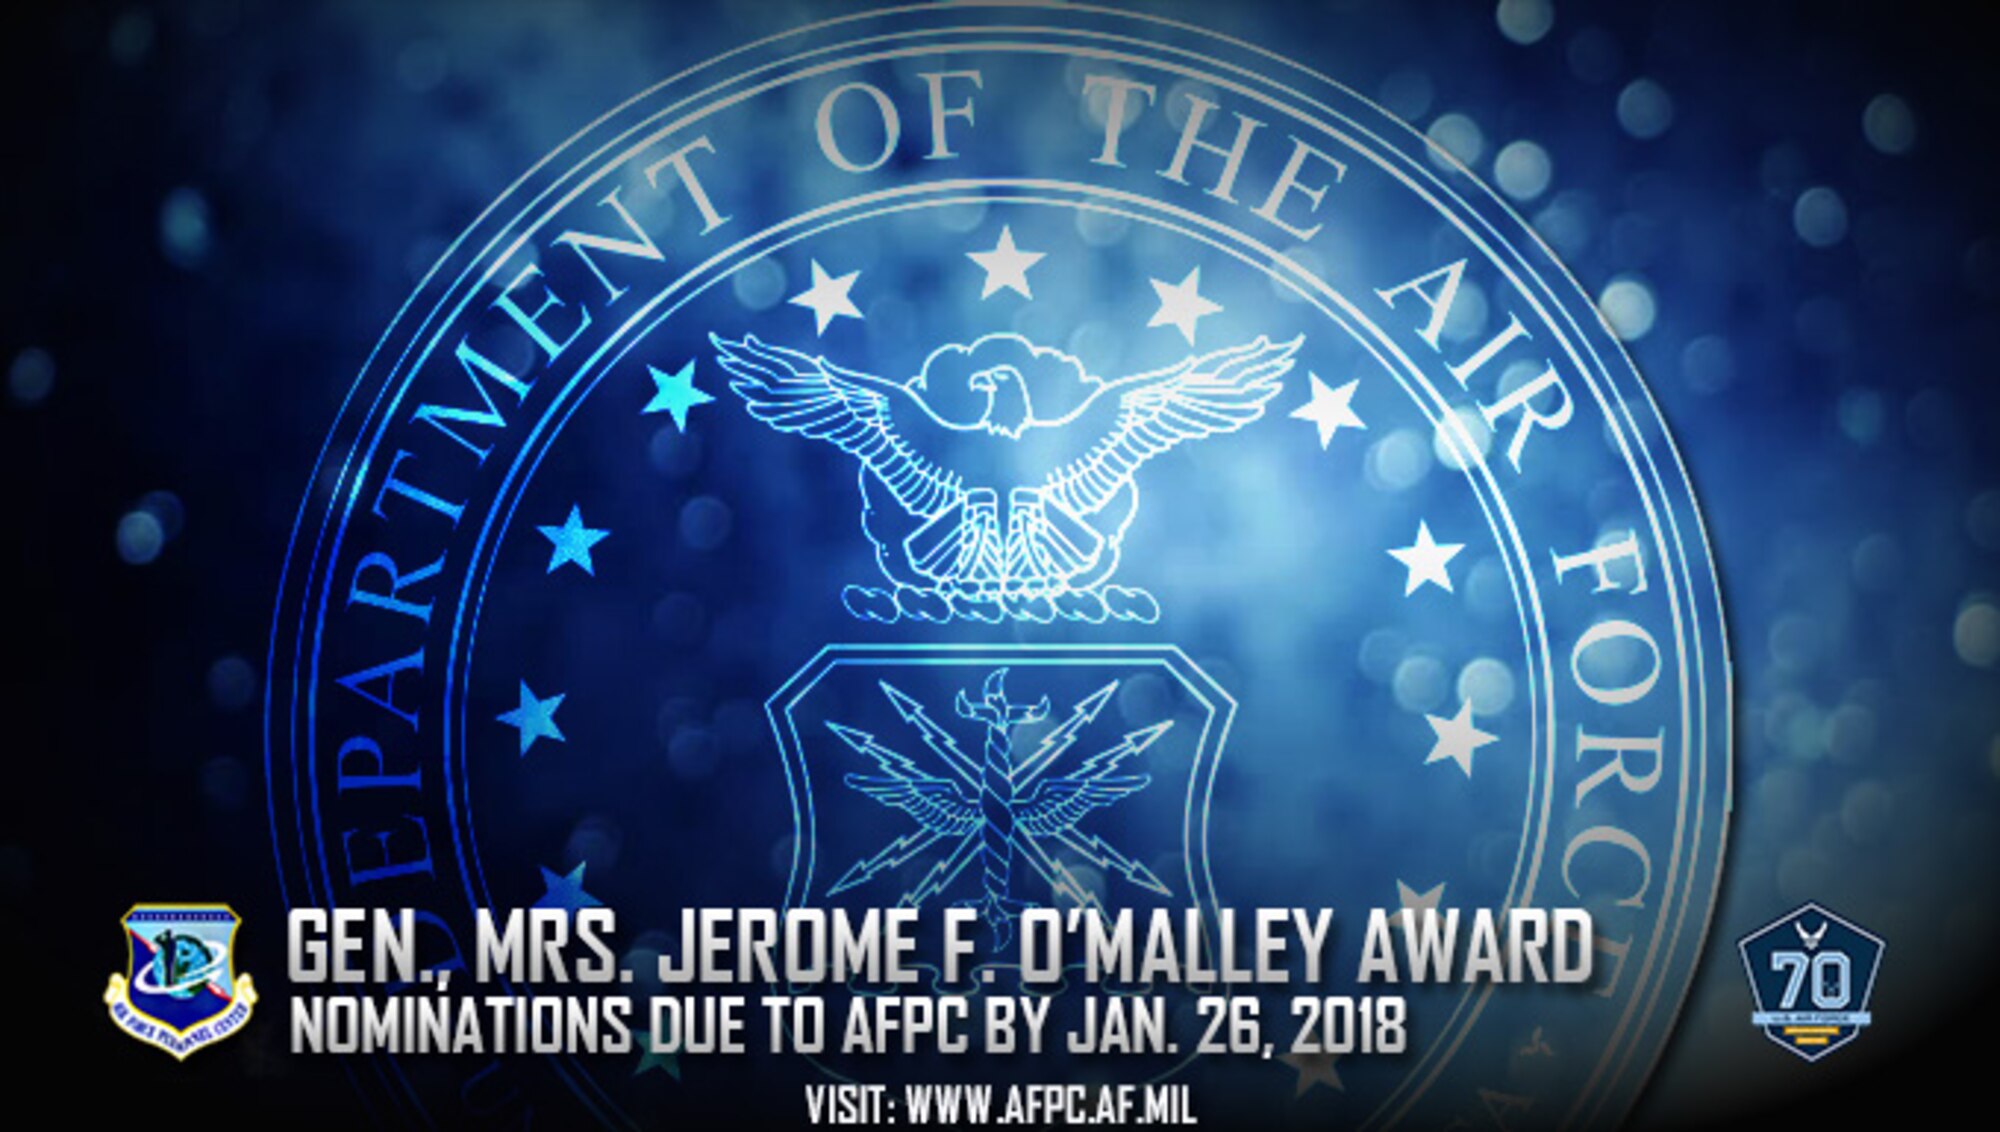 Air Force officials are seeking nominations for the 2018 General and Mrs. Jerome F. O’Malley Award. All nomination packages are due to the Air Force’s Personnel Center no later than Jan. 26, 2018. (U.S. Air Force graphic by Staff Sgt. Alexx Pons)